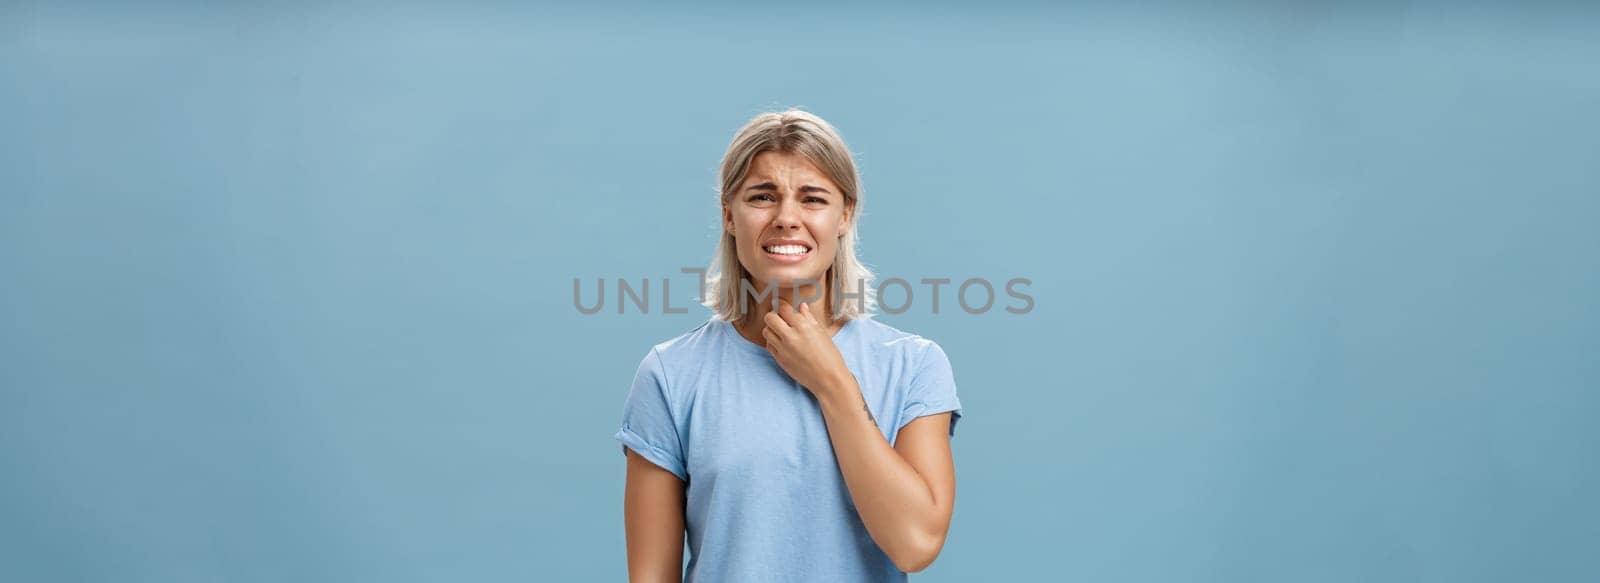 Girl feeling discomfort in throat catching cold or having seasonal allergy touching neck and frowning with clenched teeth and painful expression standing displeased over blue background. Health concept